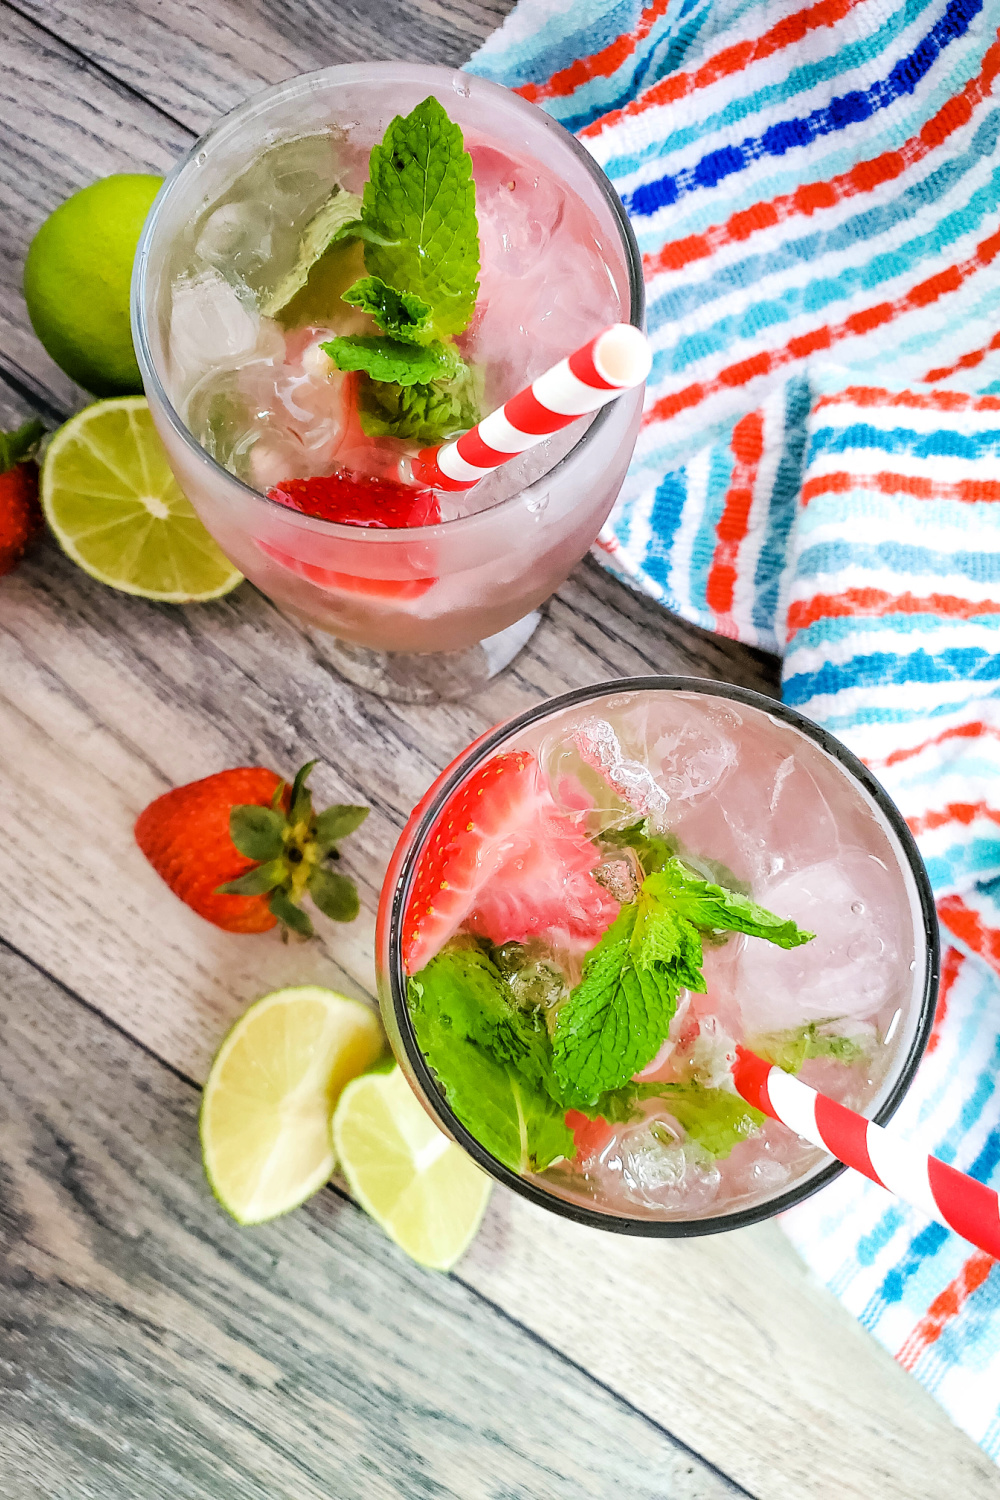 Strawberry mojito cocktail in a clear glass with a red and white paper straw. In the background is a red white and blue striped cloth napkin.